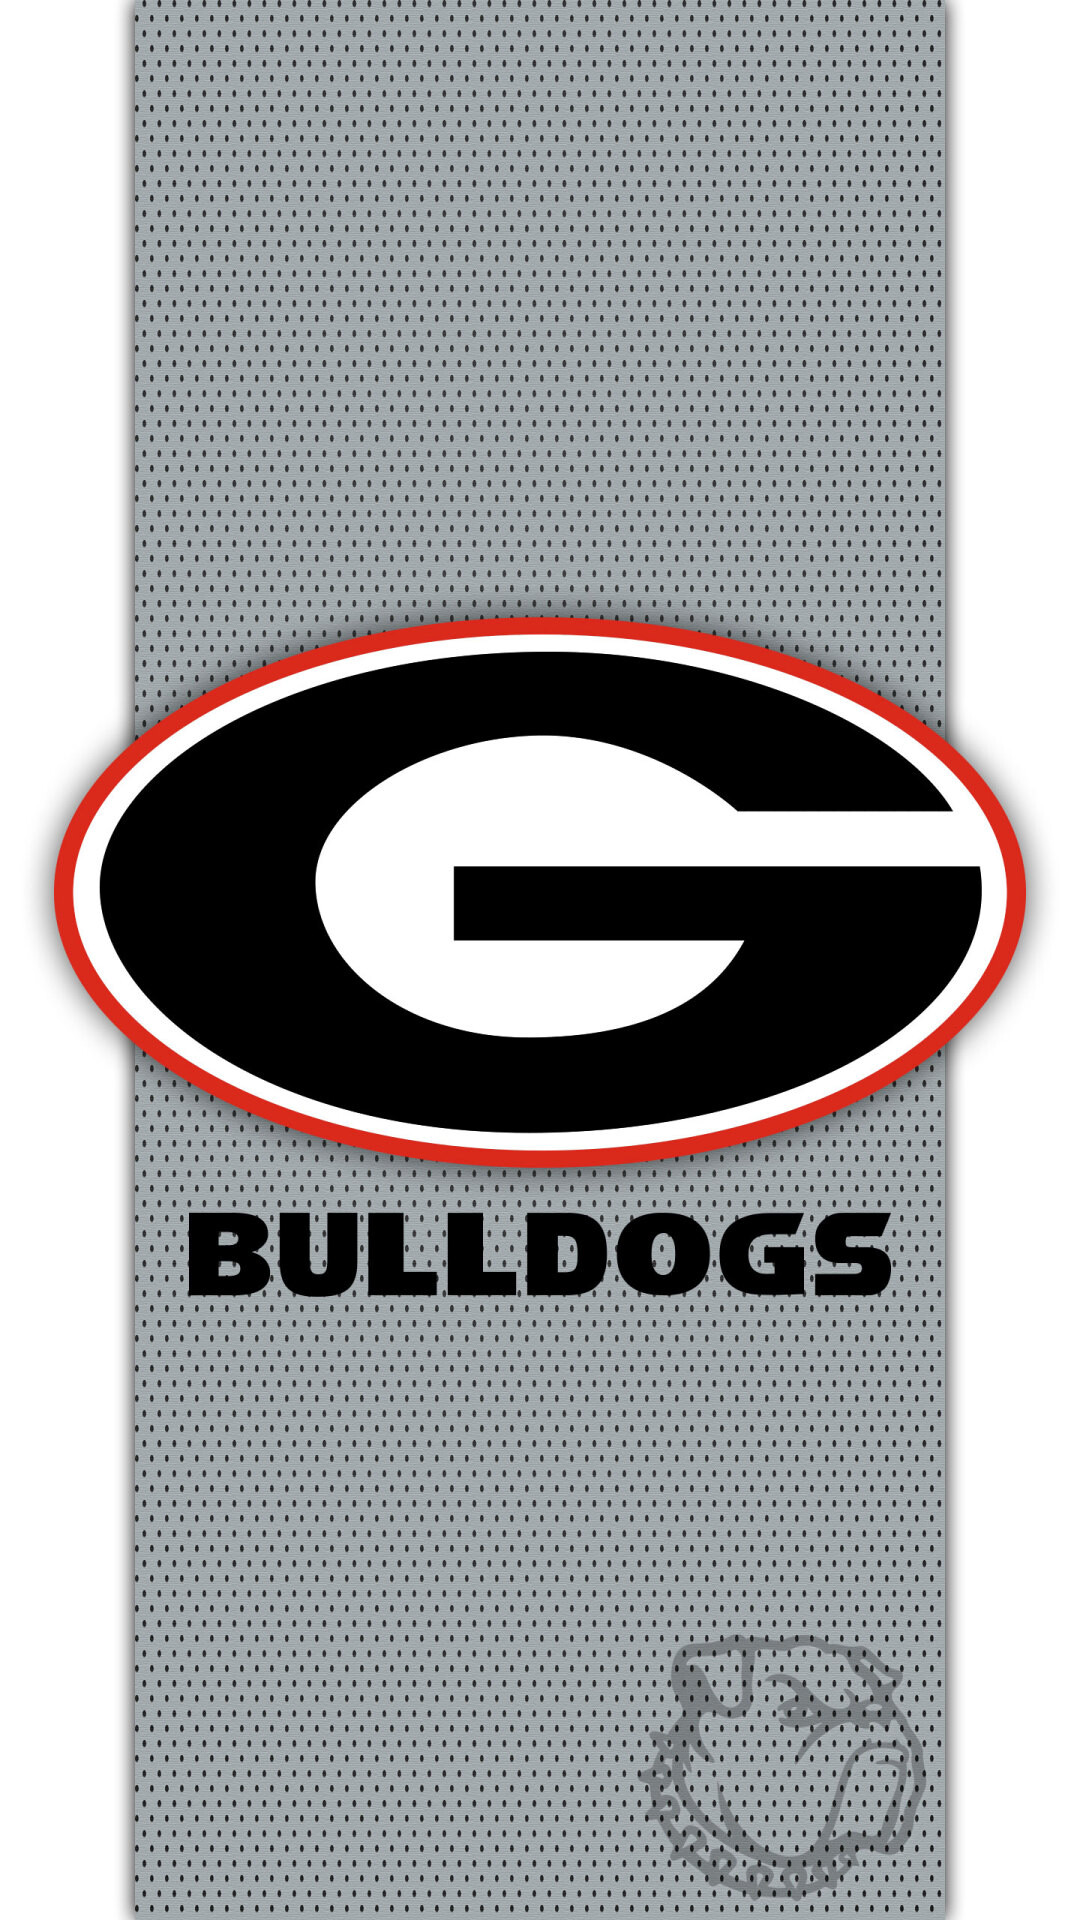 Georgia Bulldogs: The program that has won 15 conference championships including 13 SEC championships. 1080x1920 Full HD Background.